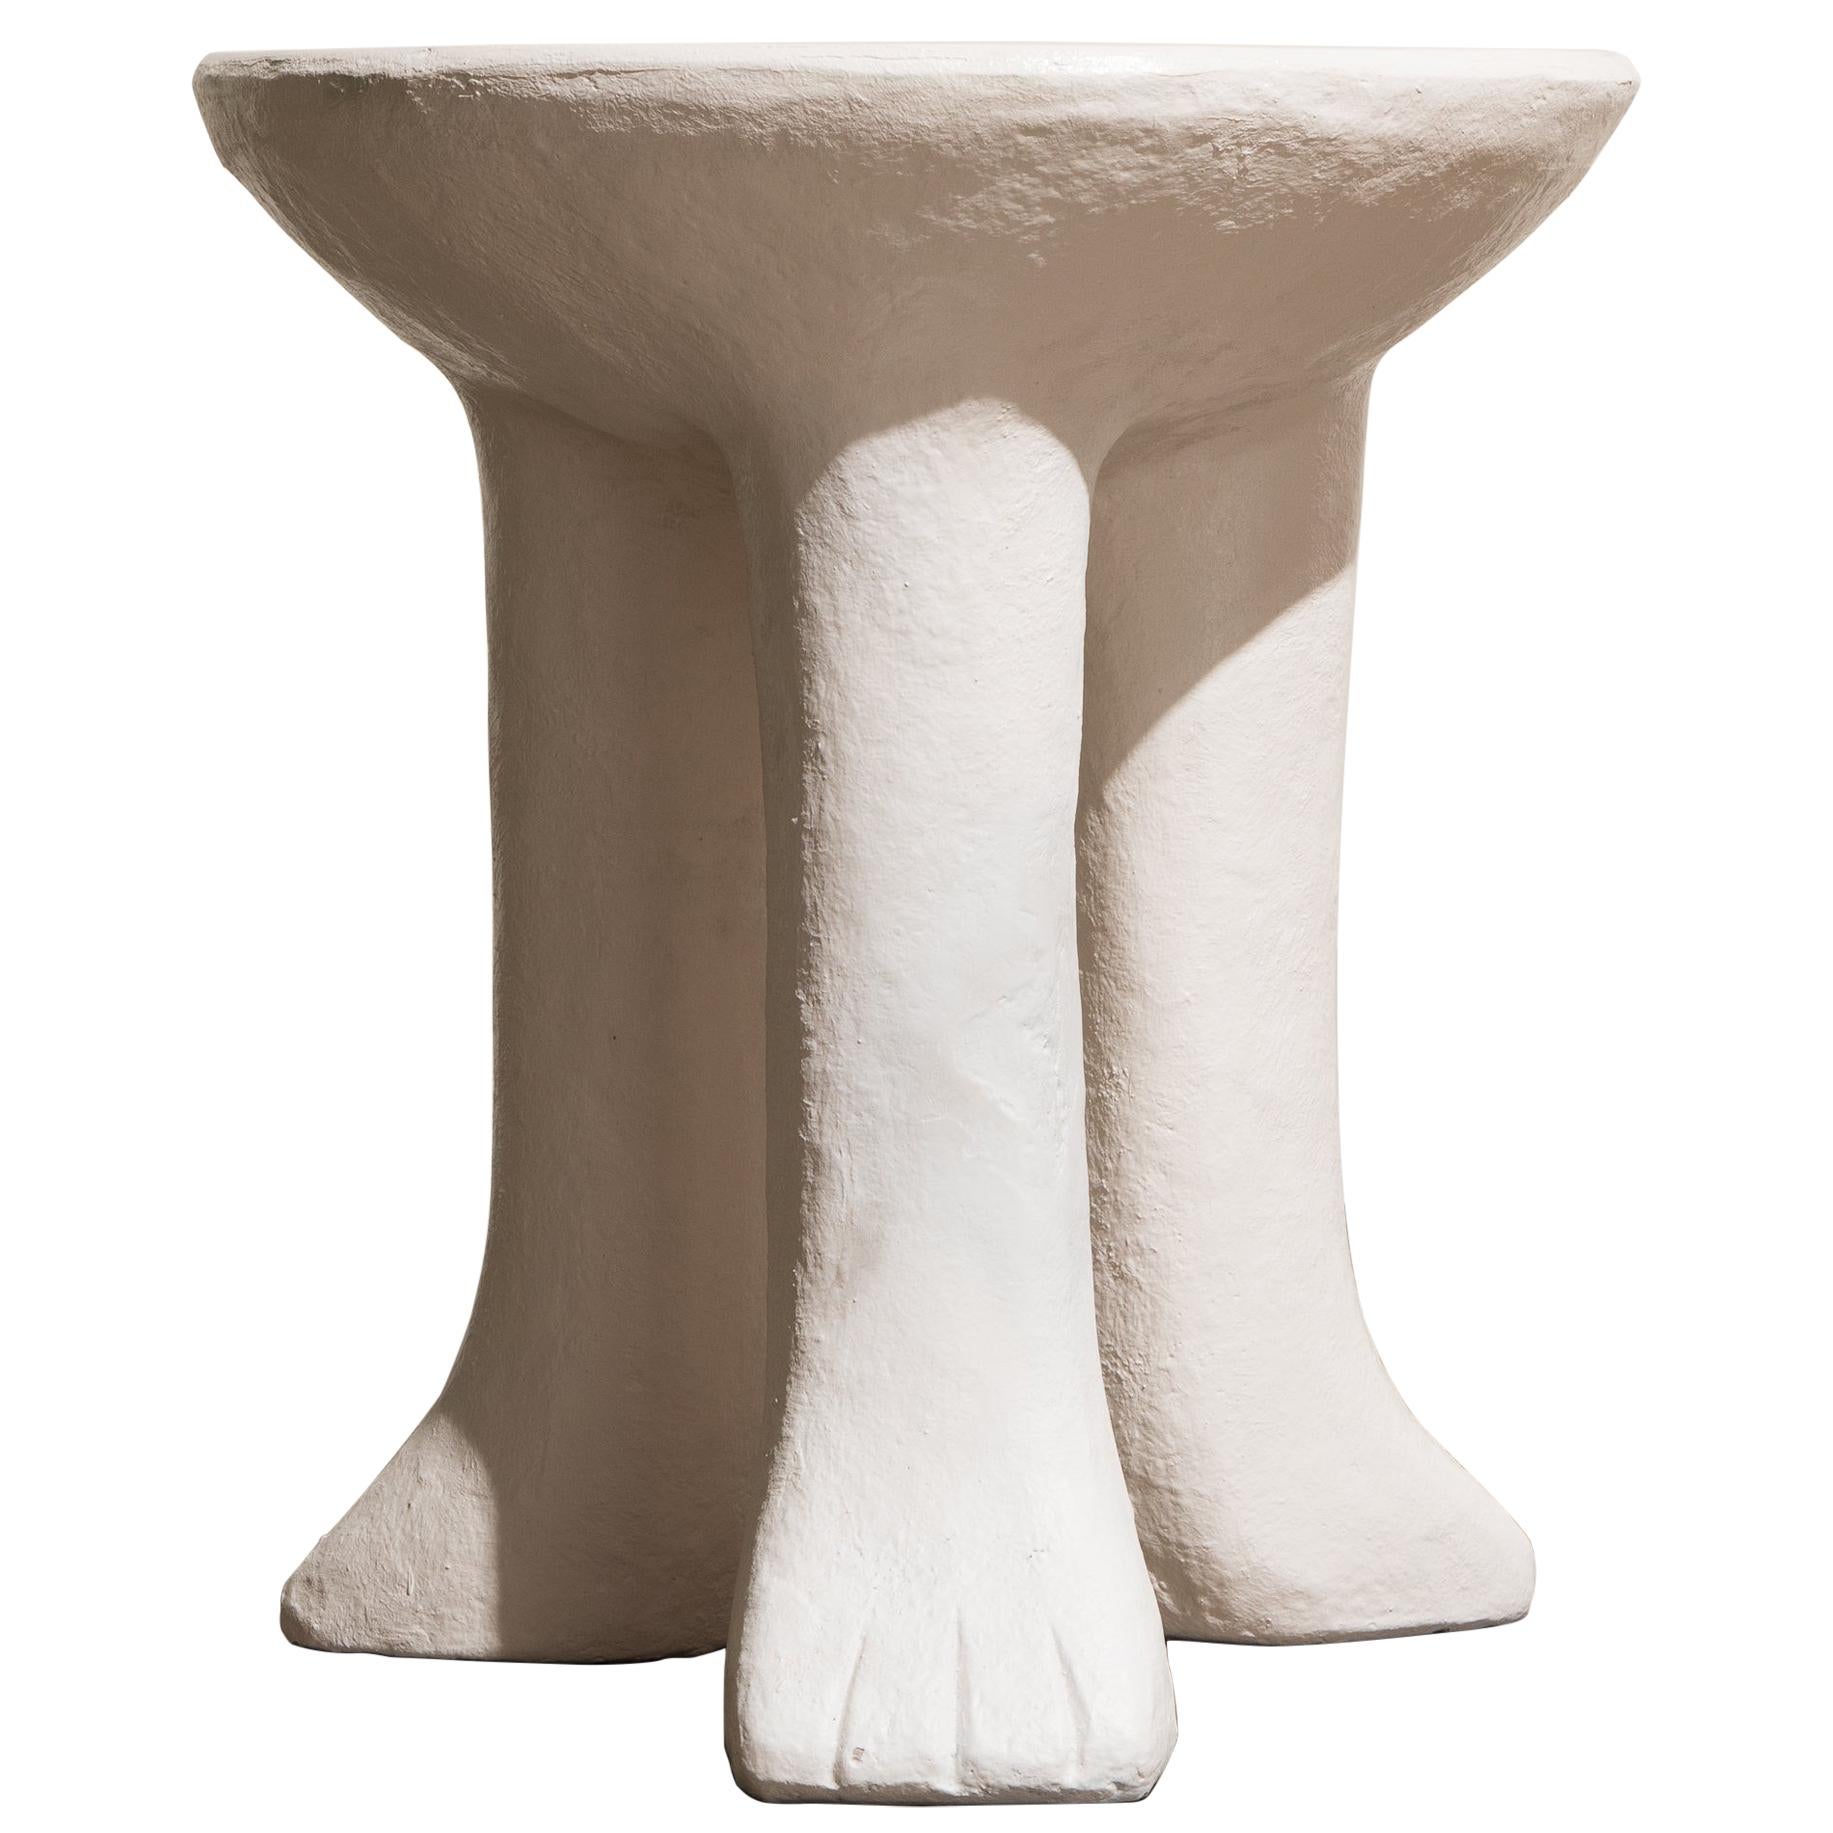 Vintage Three-Legged Side Table in the Style of John Dickinson in White Plaster